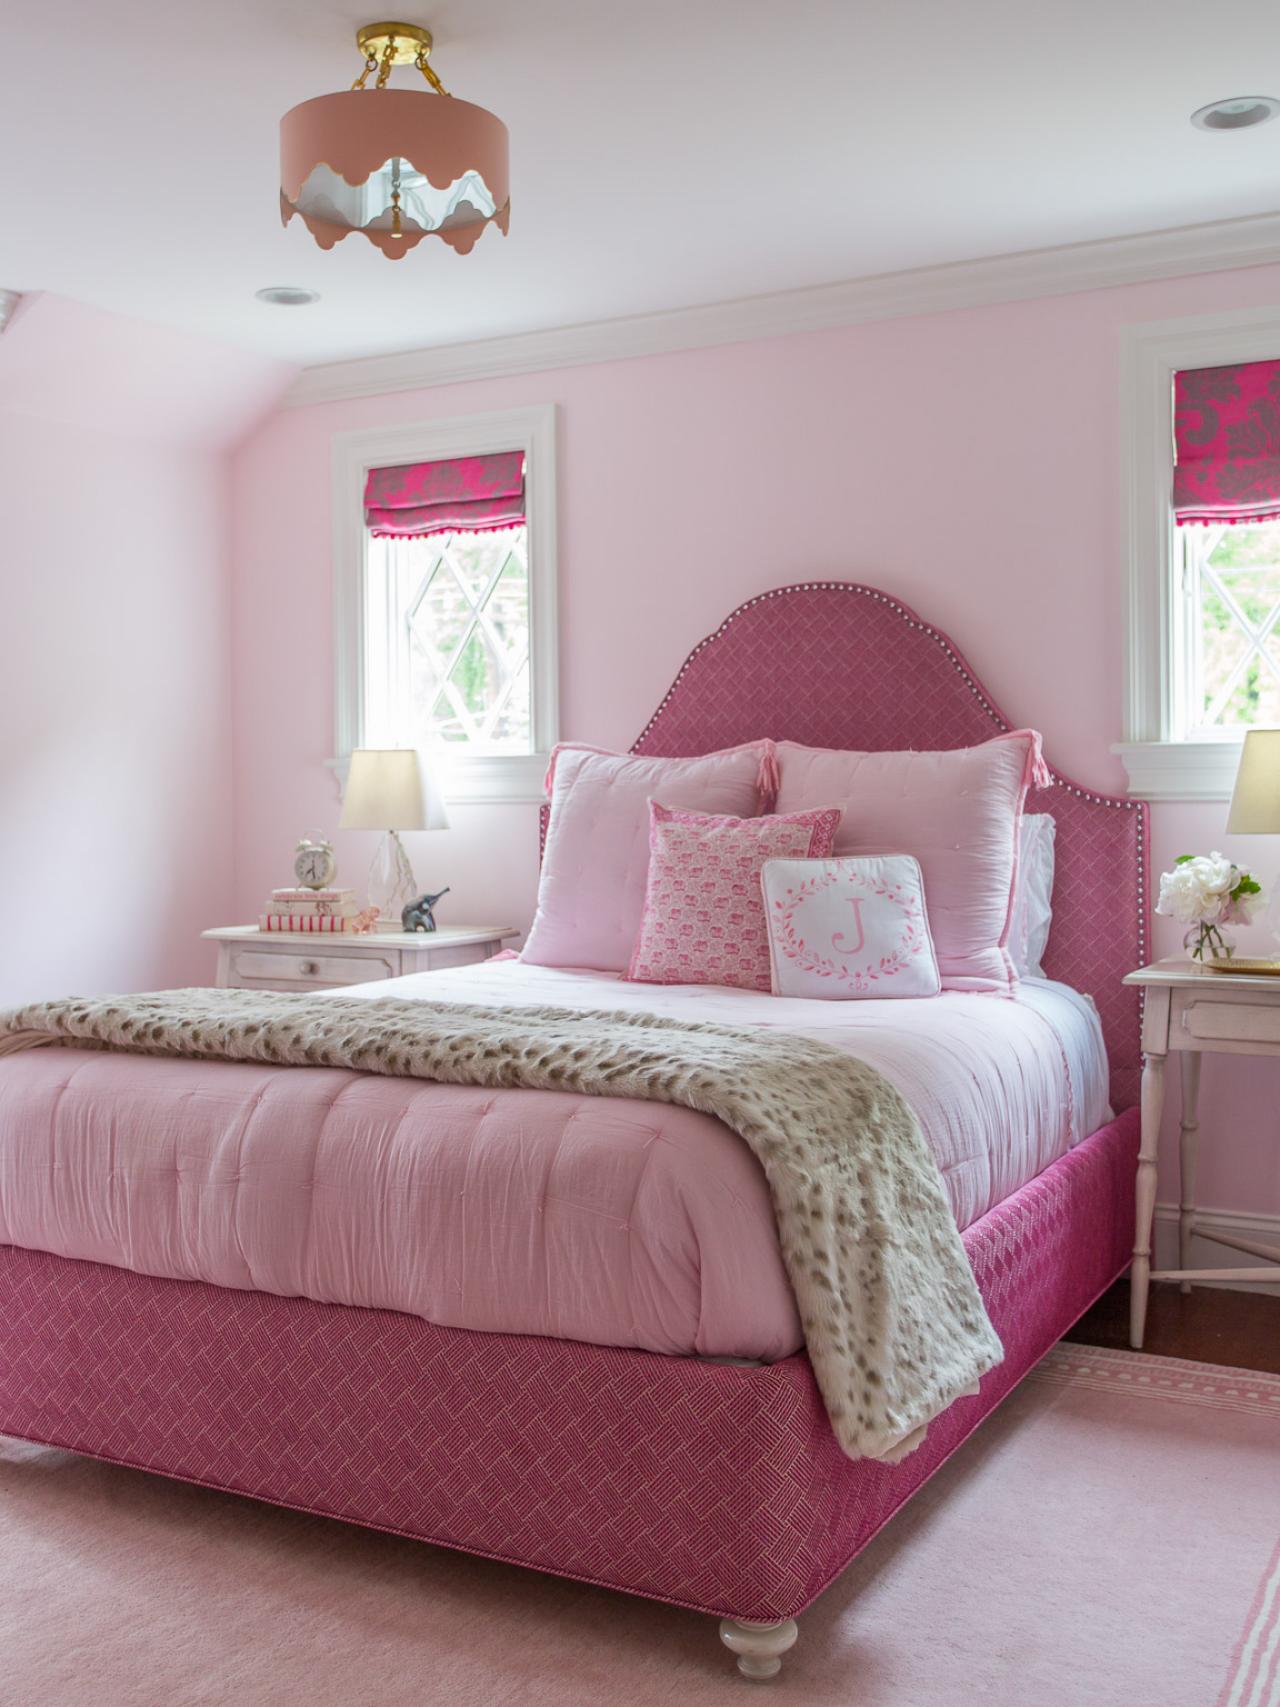 Pink Transitional Girl's Bedroom With J Pillow HGTV